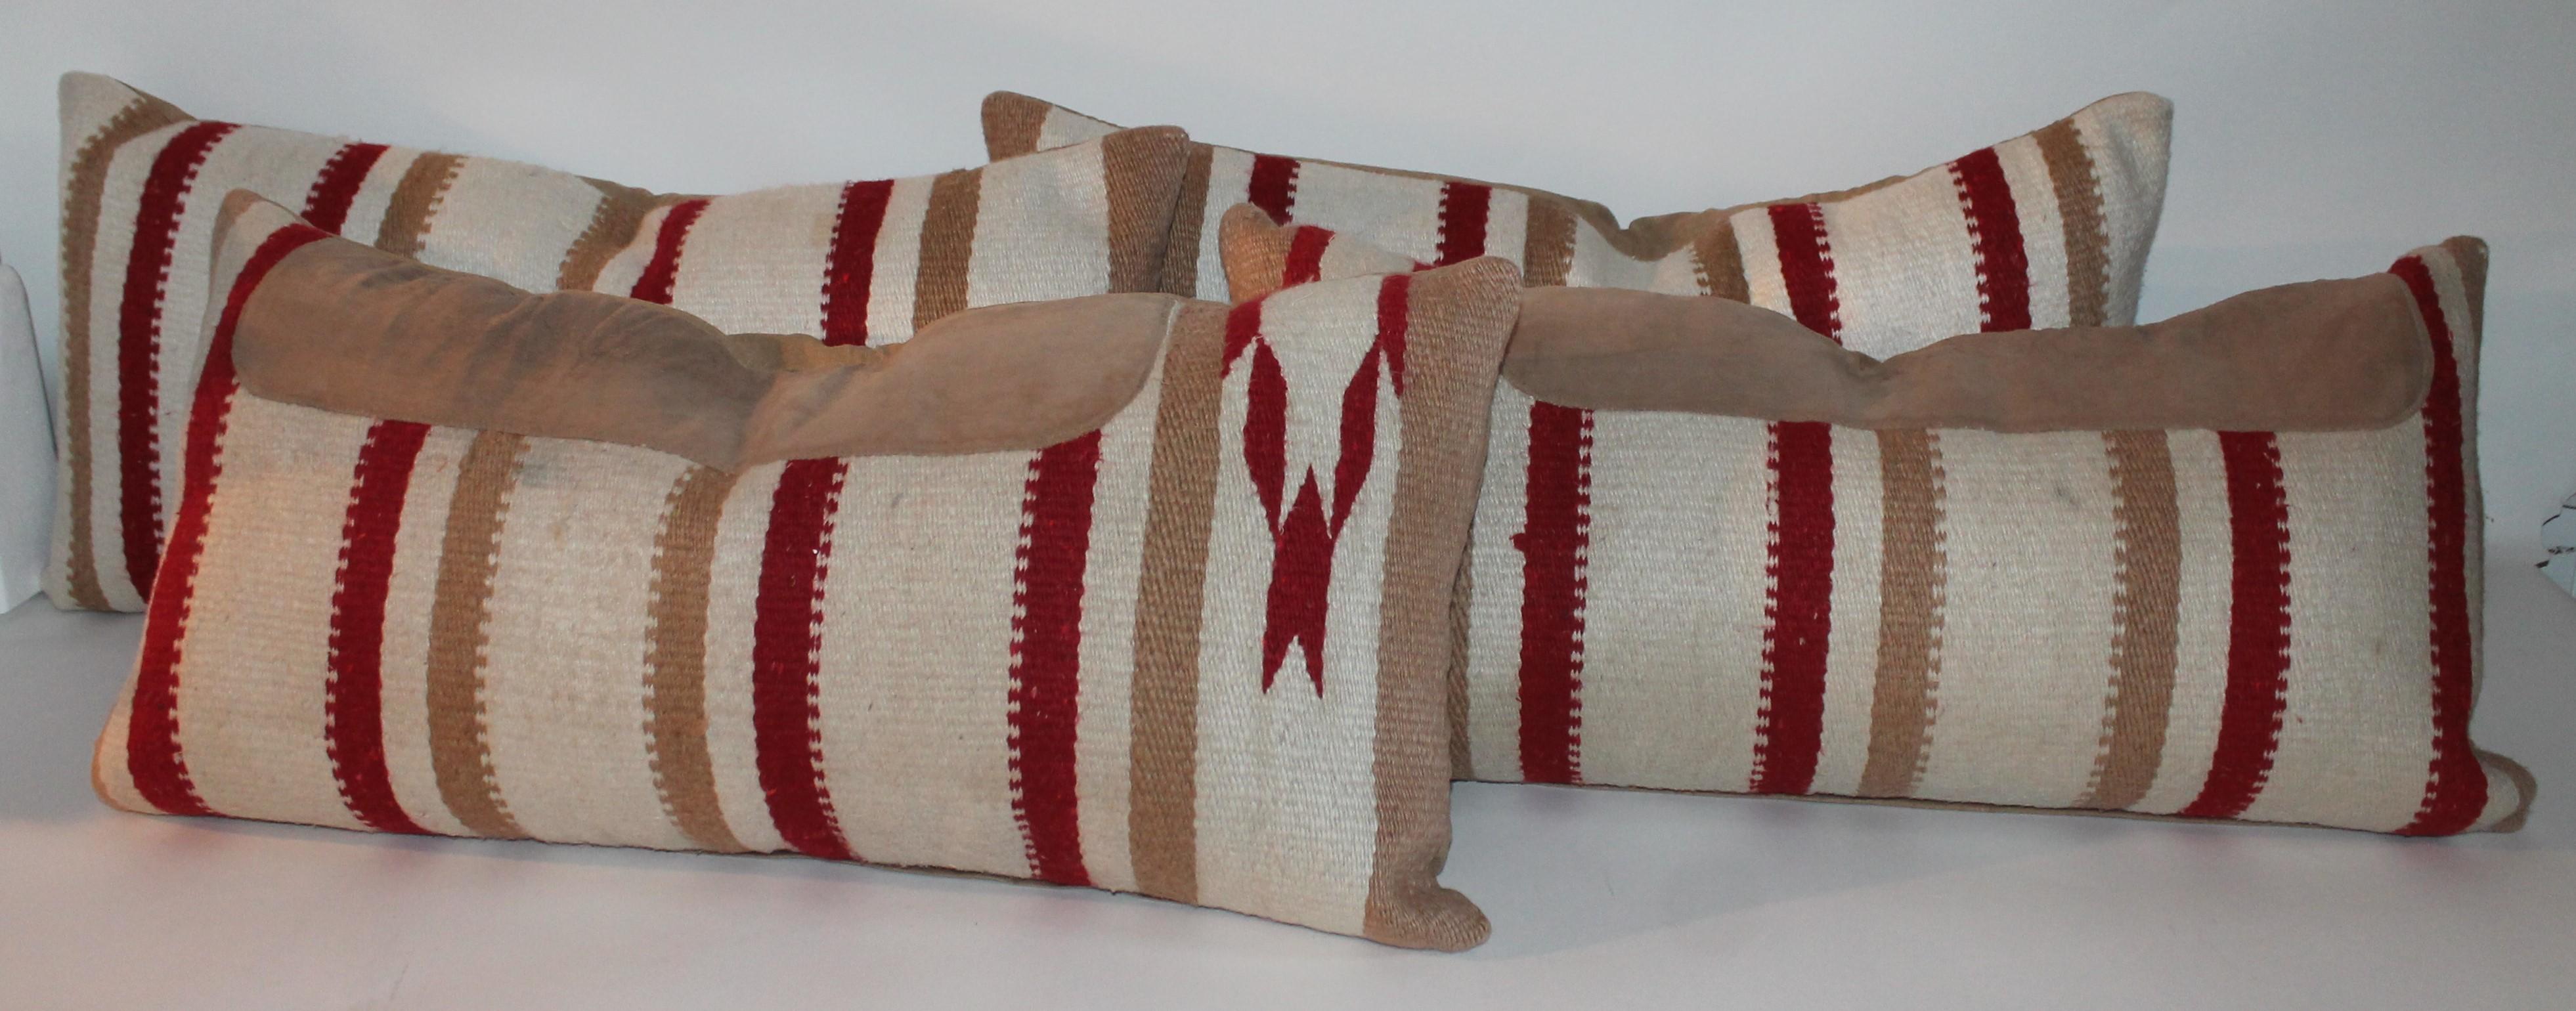 Navajo Indian weaving bolster pillows from a saddle blanket. Two pillows have suede on them and two are without. Two pairs in stock. Two pairs for 1895, for all four.